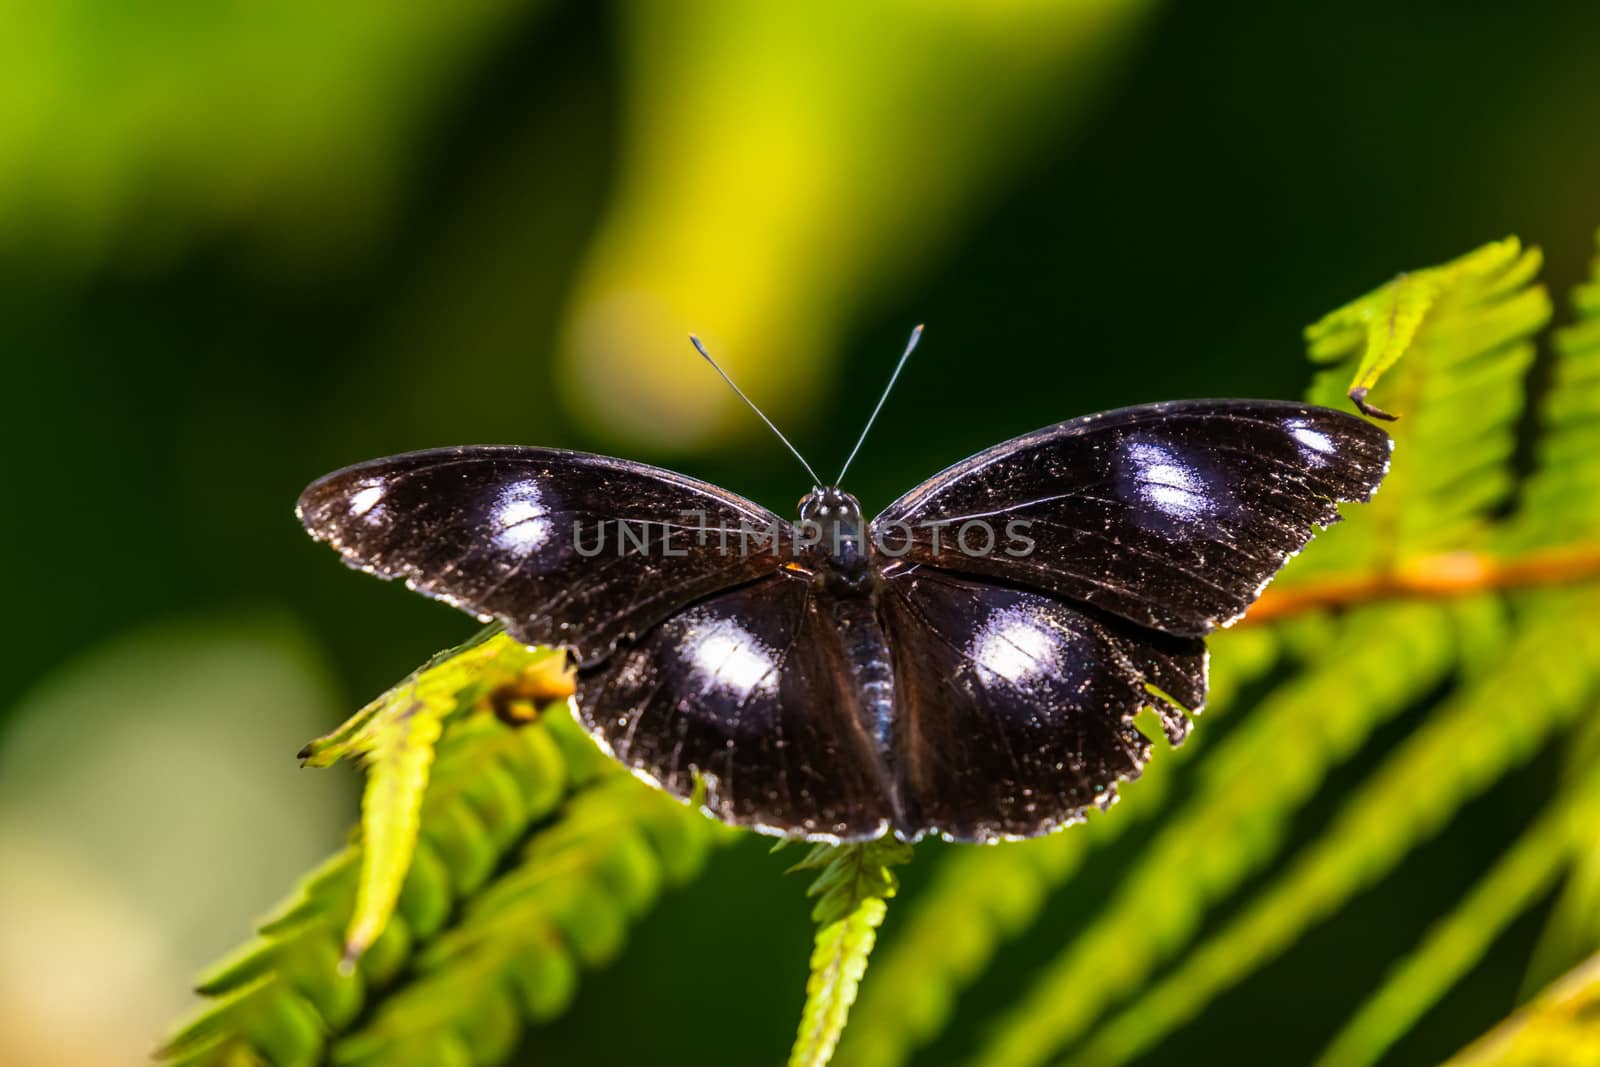 Eggfly butterfly - Hypolimnas bolina - black colour with white spots captured in Kuranda